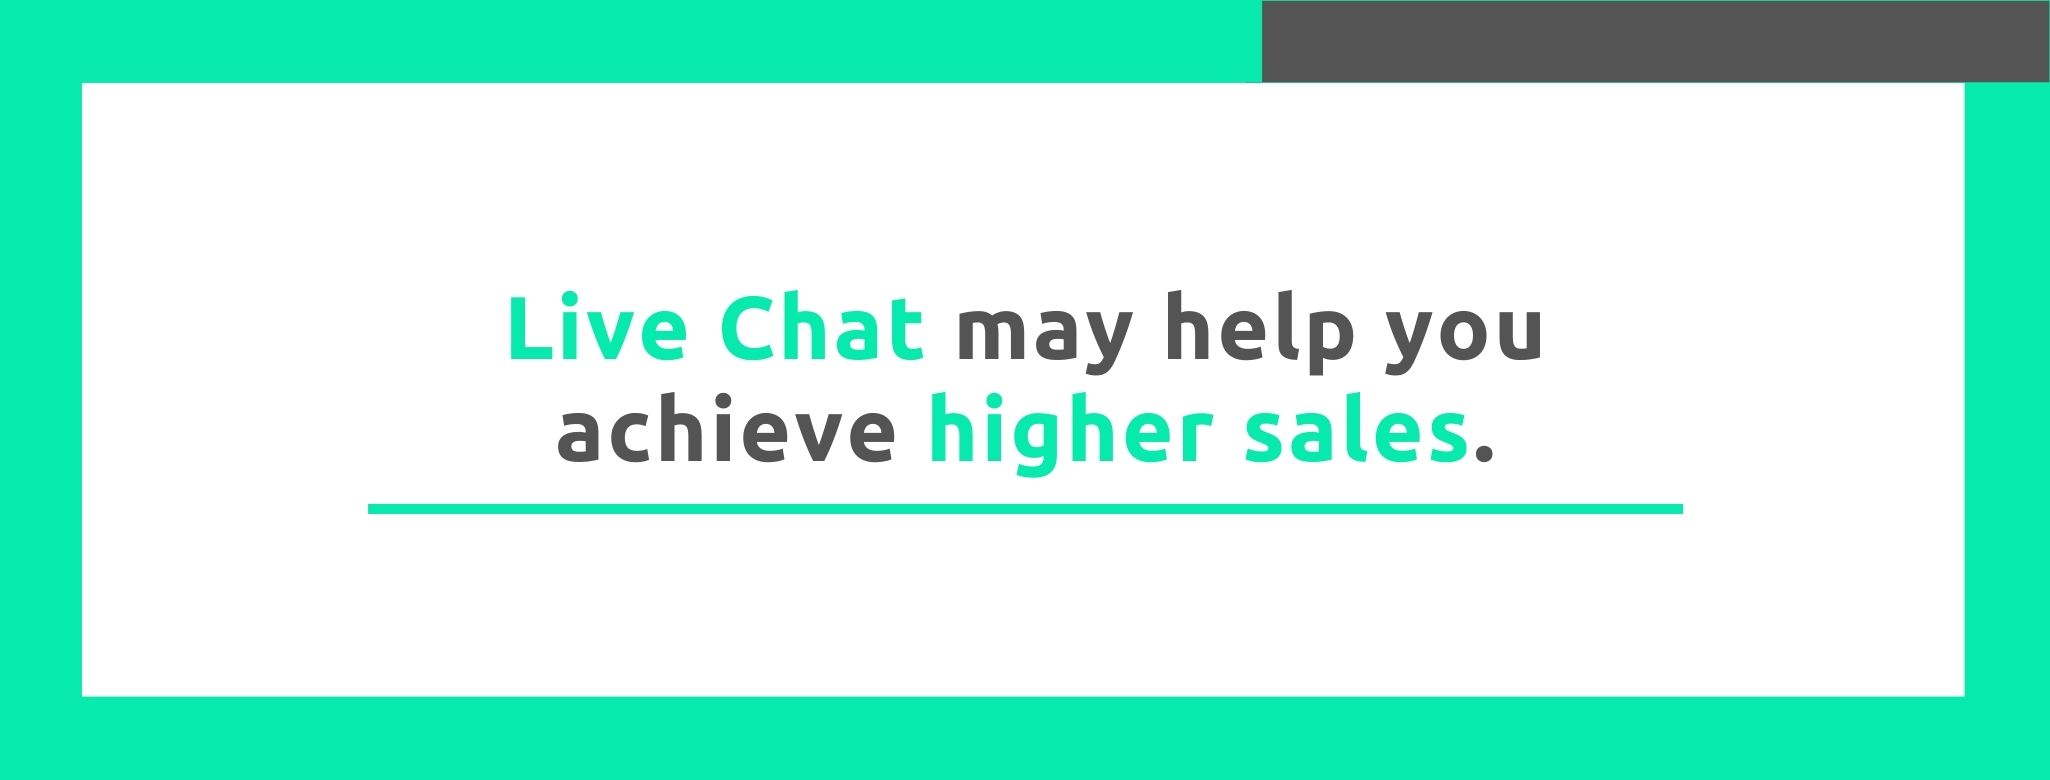 Live Chat may help you achieve higher sales. - 22 Live Chat Statistics - Replyco